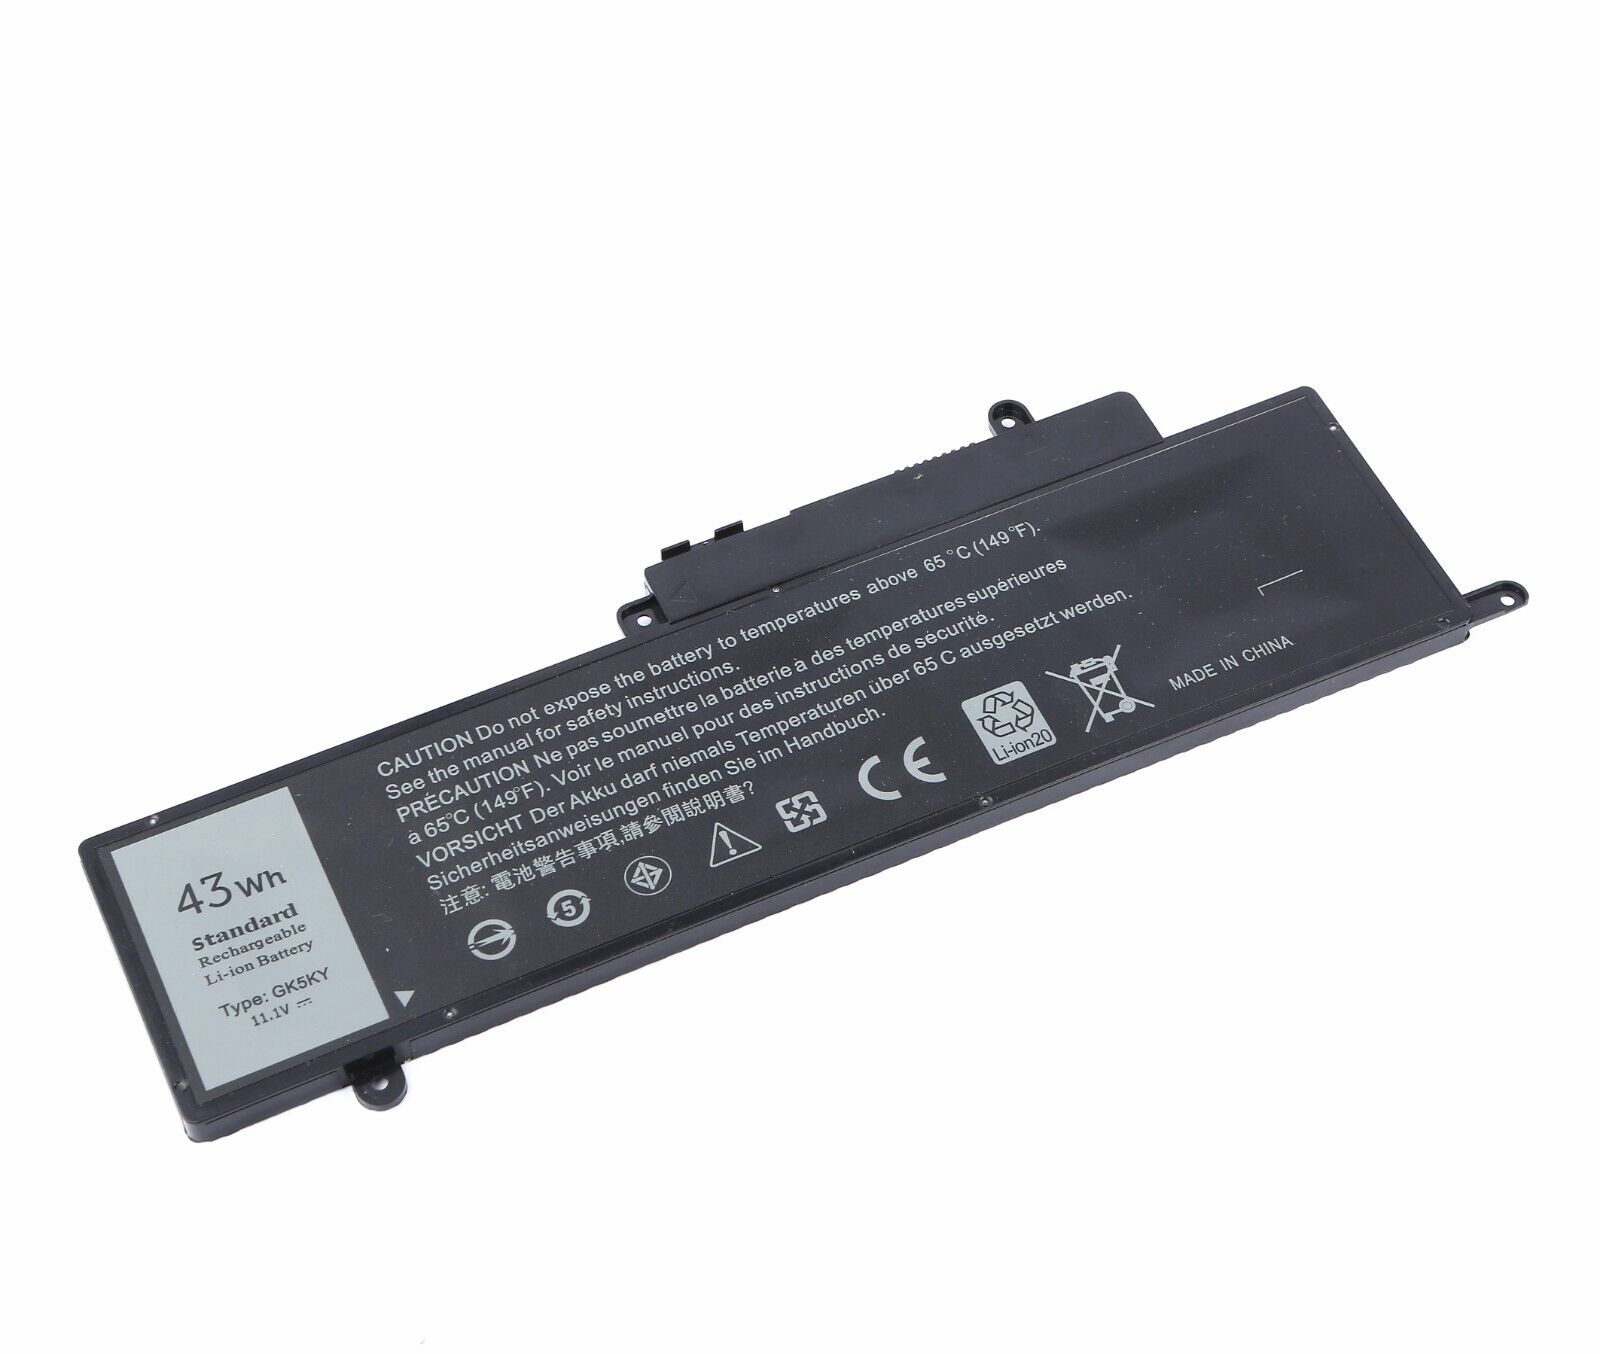 New Replace GK5KY Battery for Dell Inspiron 11 3147 3000 3152 13 7347 7352 92NCT